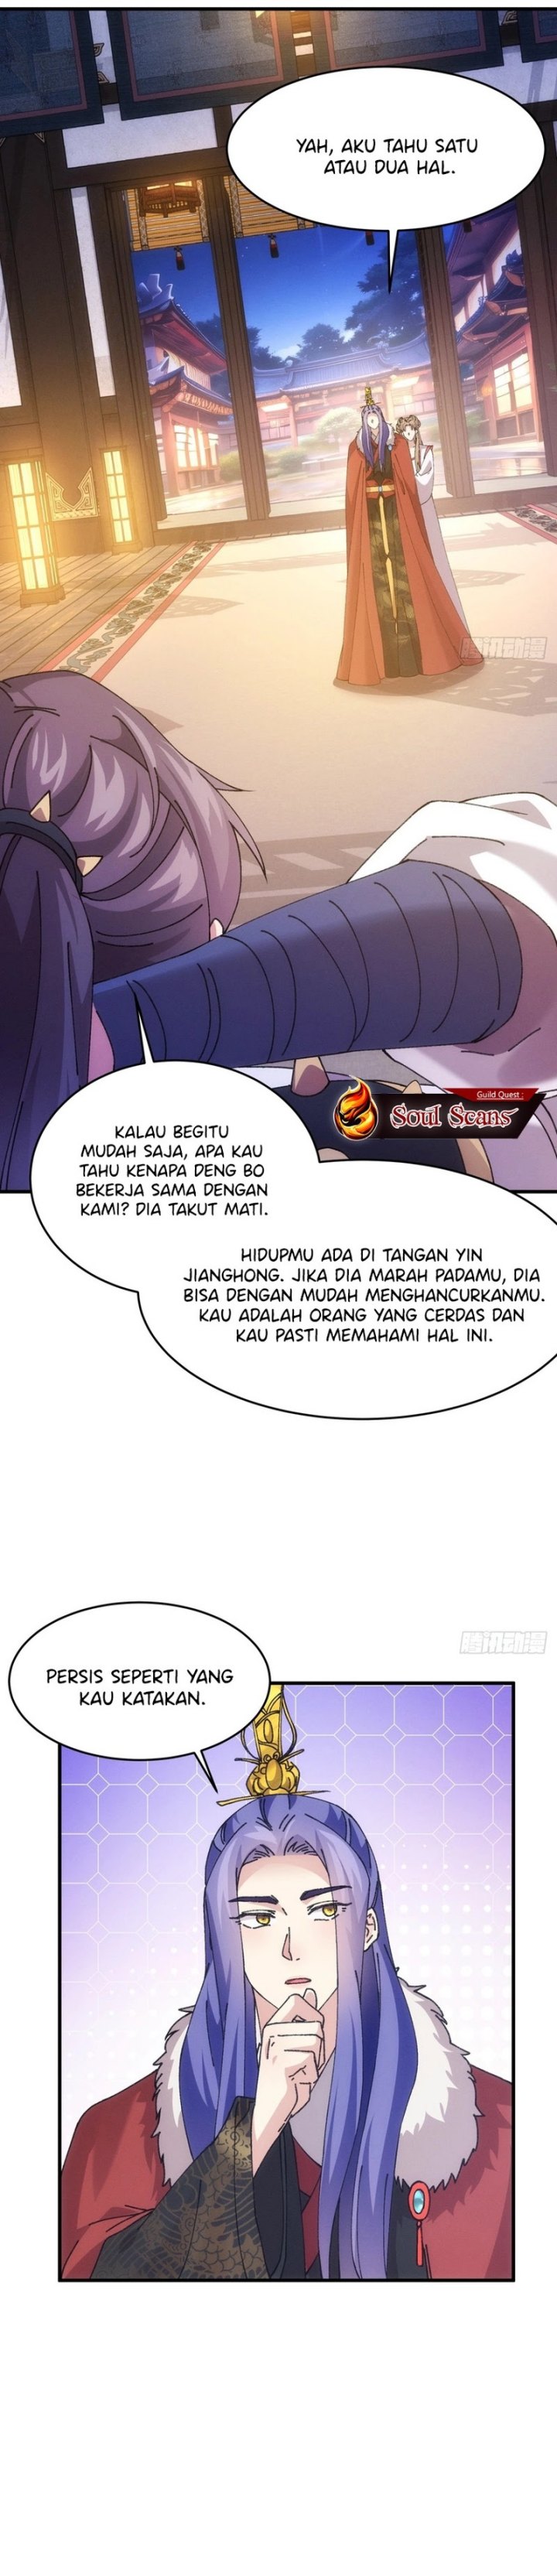 Dilarang COPAS - situs resmi www.mangacanblog.com - Komik i just dont play the card according to the routine 193 - chapter 193 194 Indonesia i just dont play the card according to the routine 193 - chapter 193 Terbaru 3|Baca Manga Komik Indonesia|Mangacan